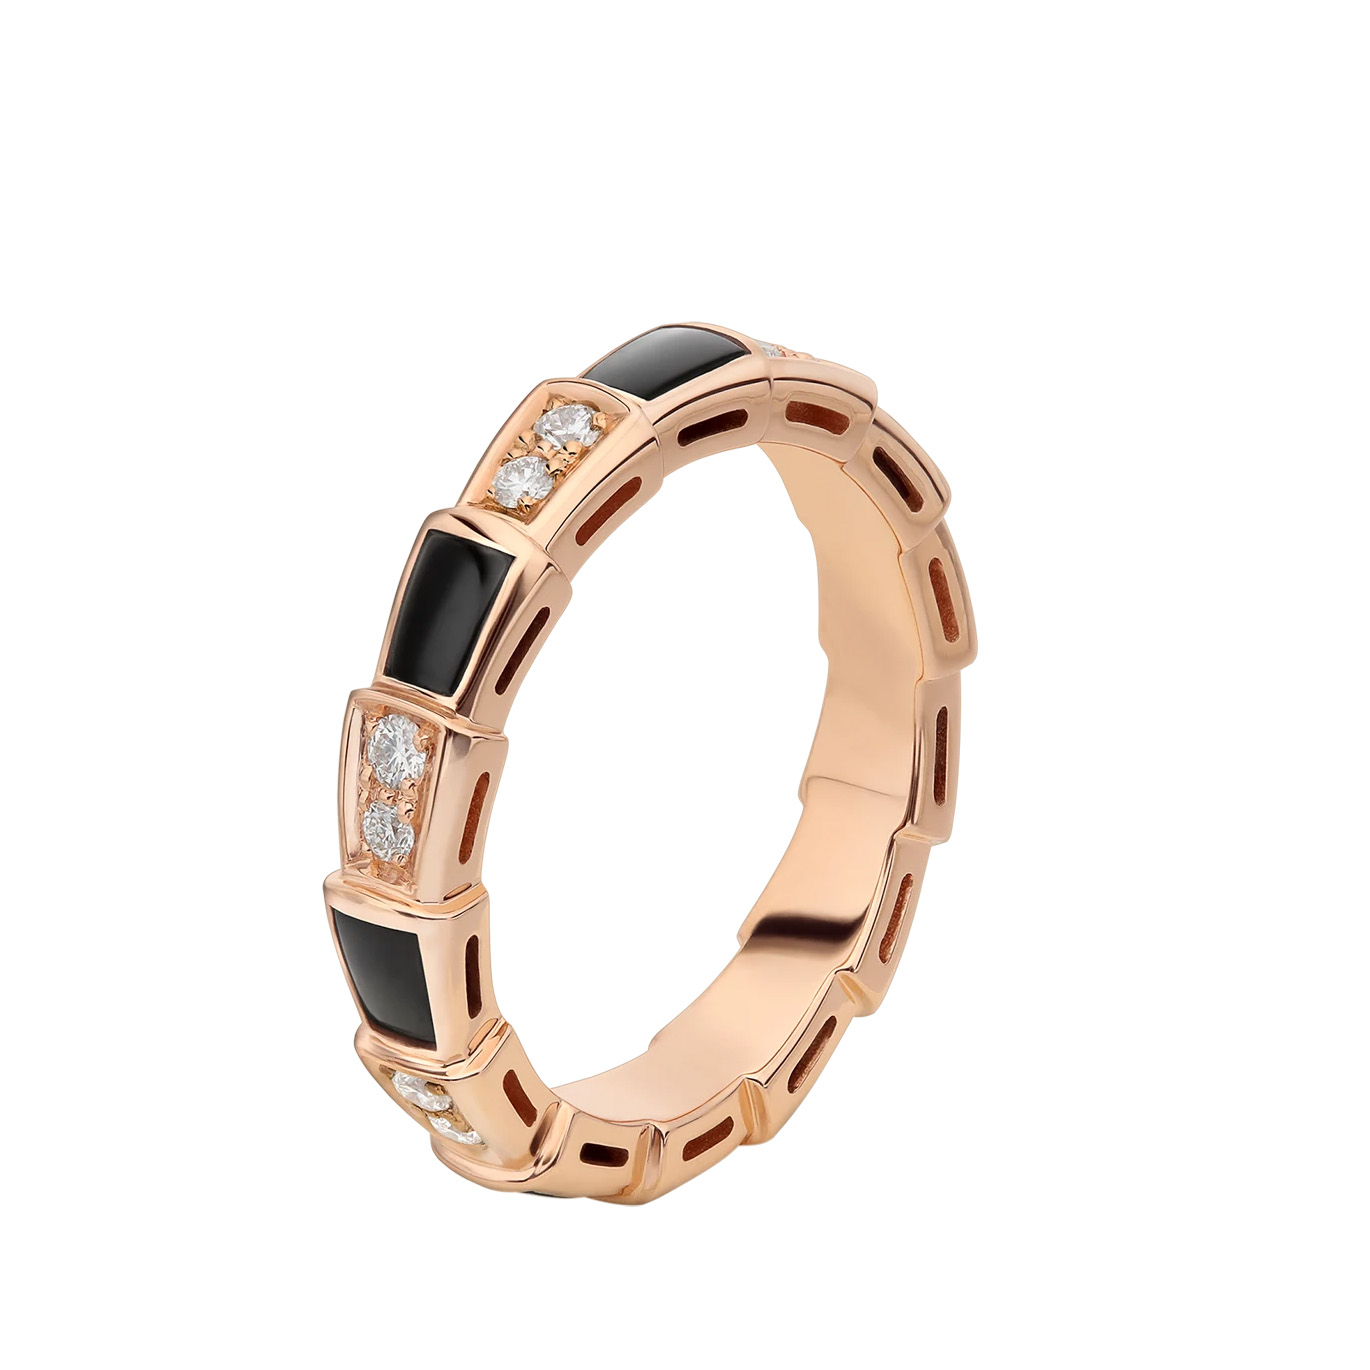 Wholesale Design 18k rose gold thin ring OEM/ODM Jewelry set with onyx elements and pavé diamonds 20 years in OEM jewelry